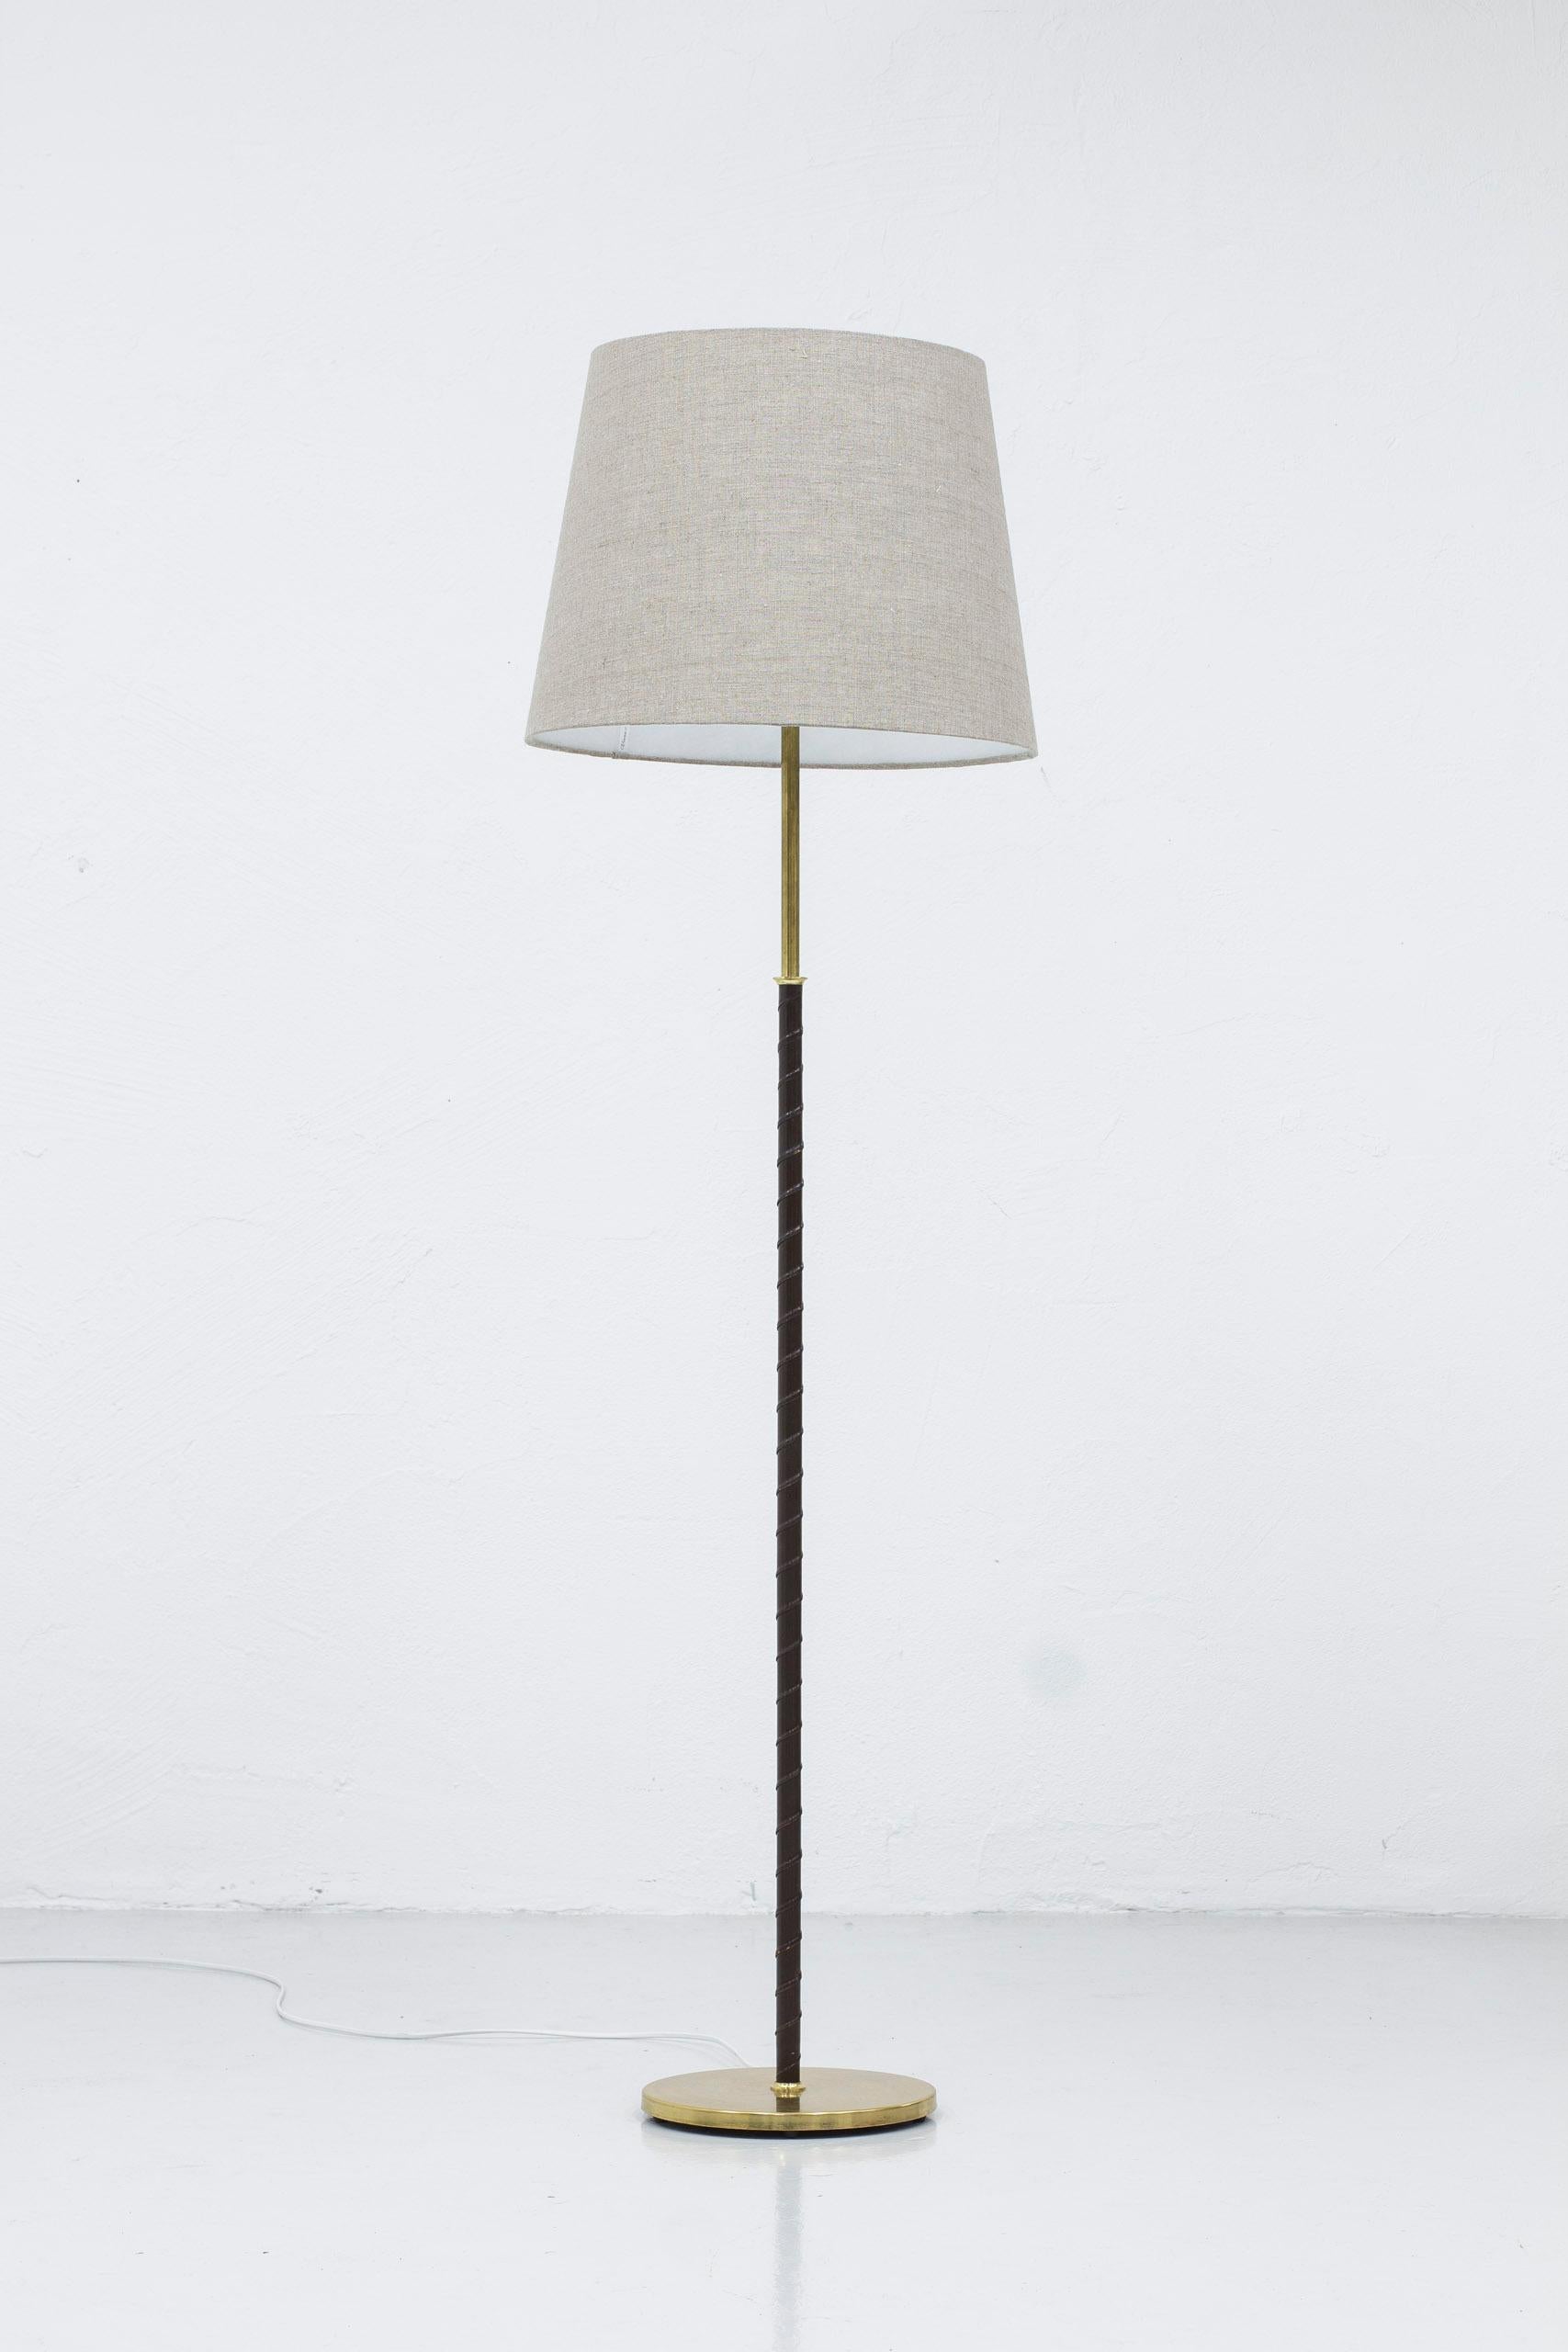 Floor lamp produced in Sweden by Möller Armaturer. Made during the 1950s. Brass base and stem with original dark brown leather. New linen lamp shade in grey included in purchase. Light switch on the lamp holder in working order. Good vintage